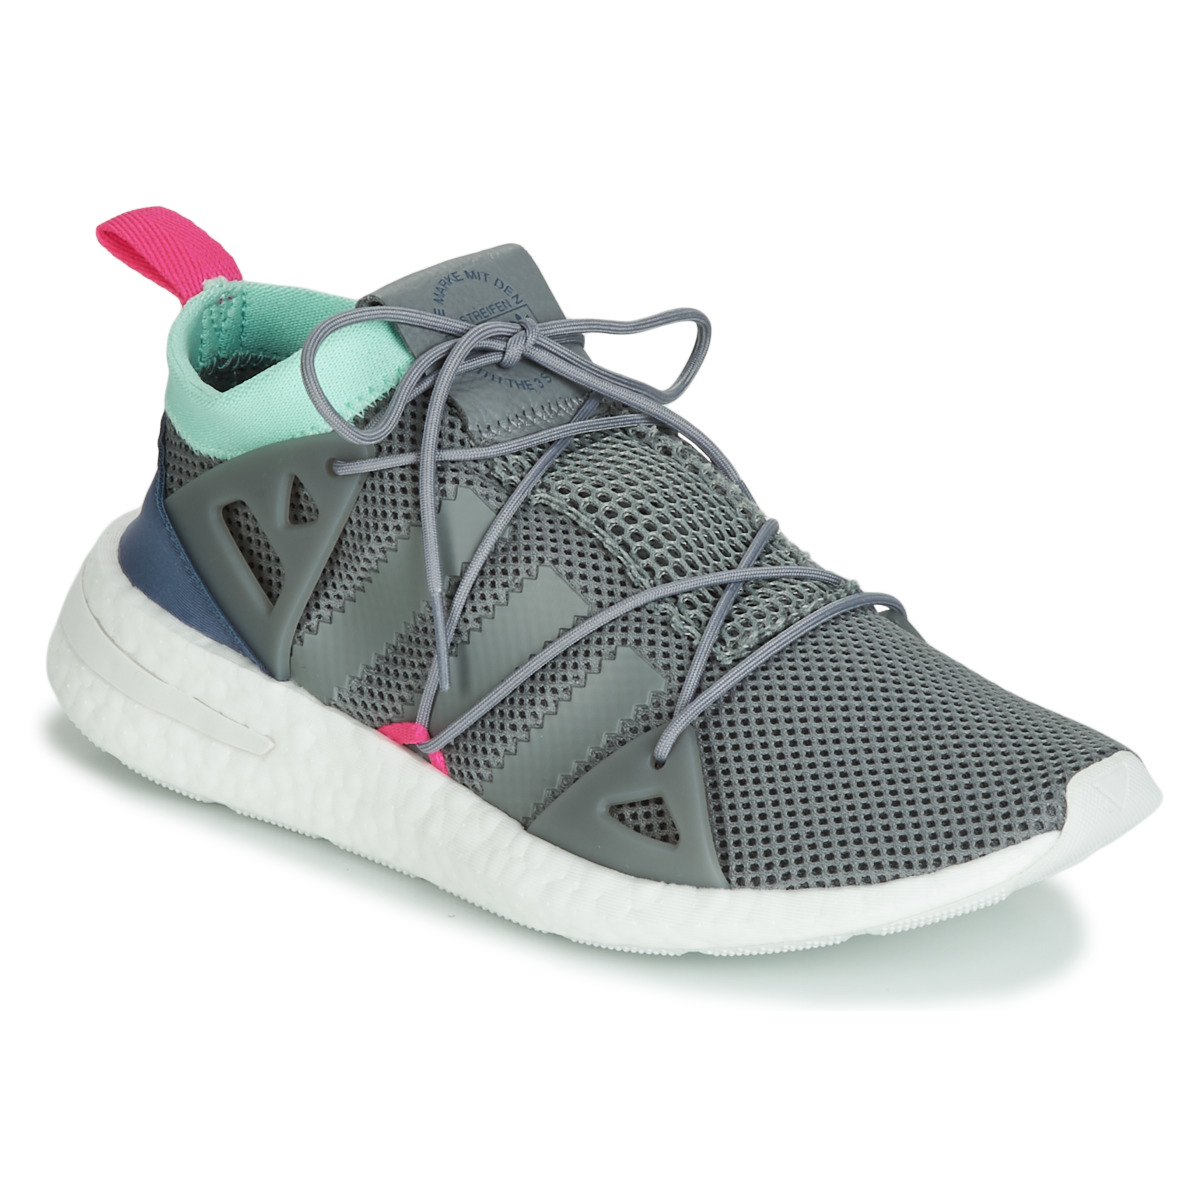 Xαμηλά Sneakers adidas ARKYN W